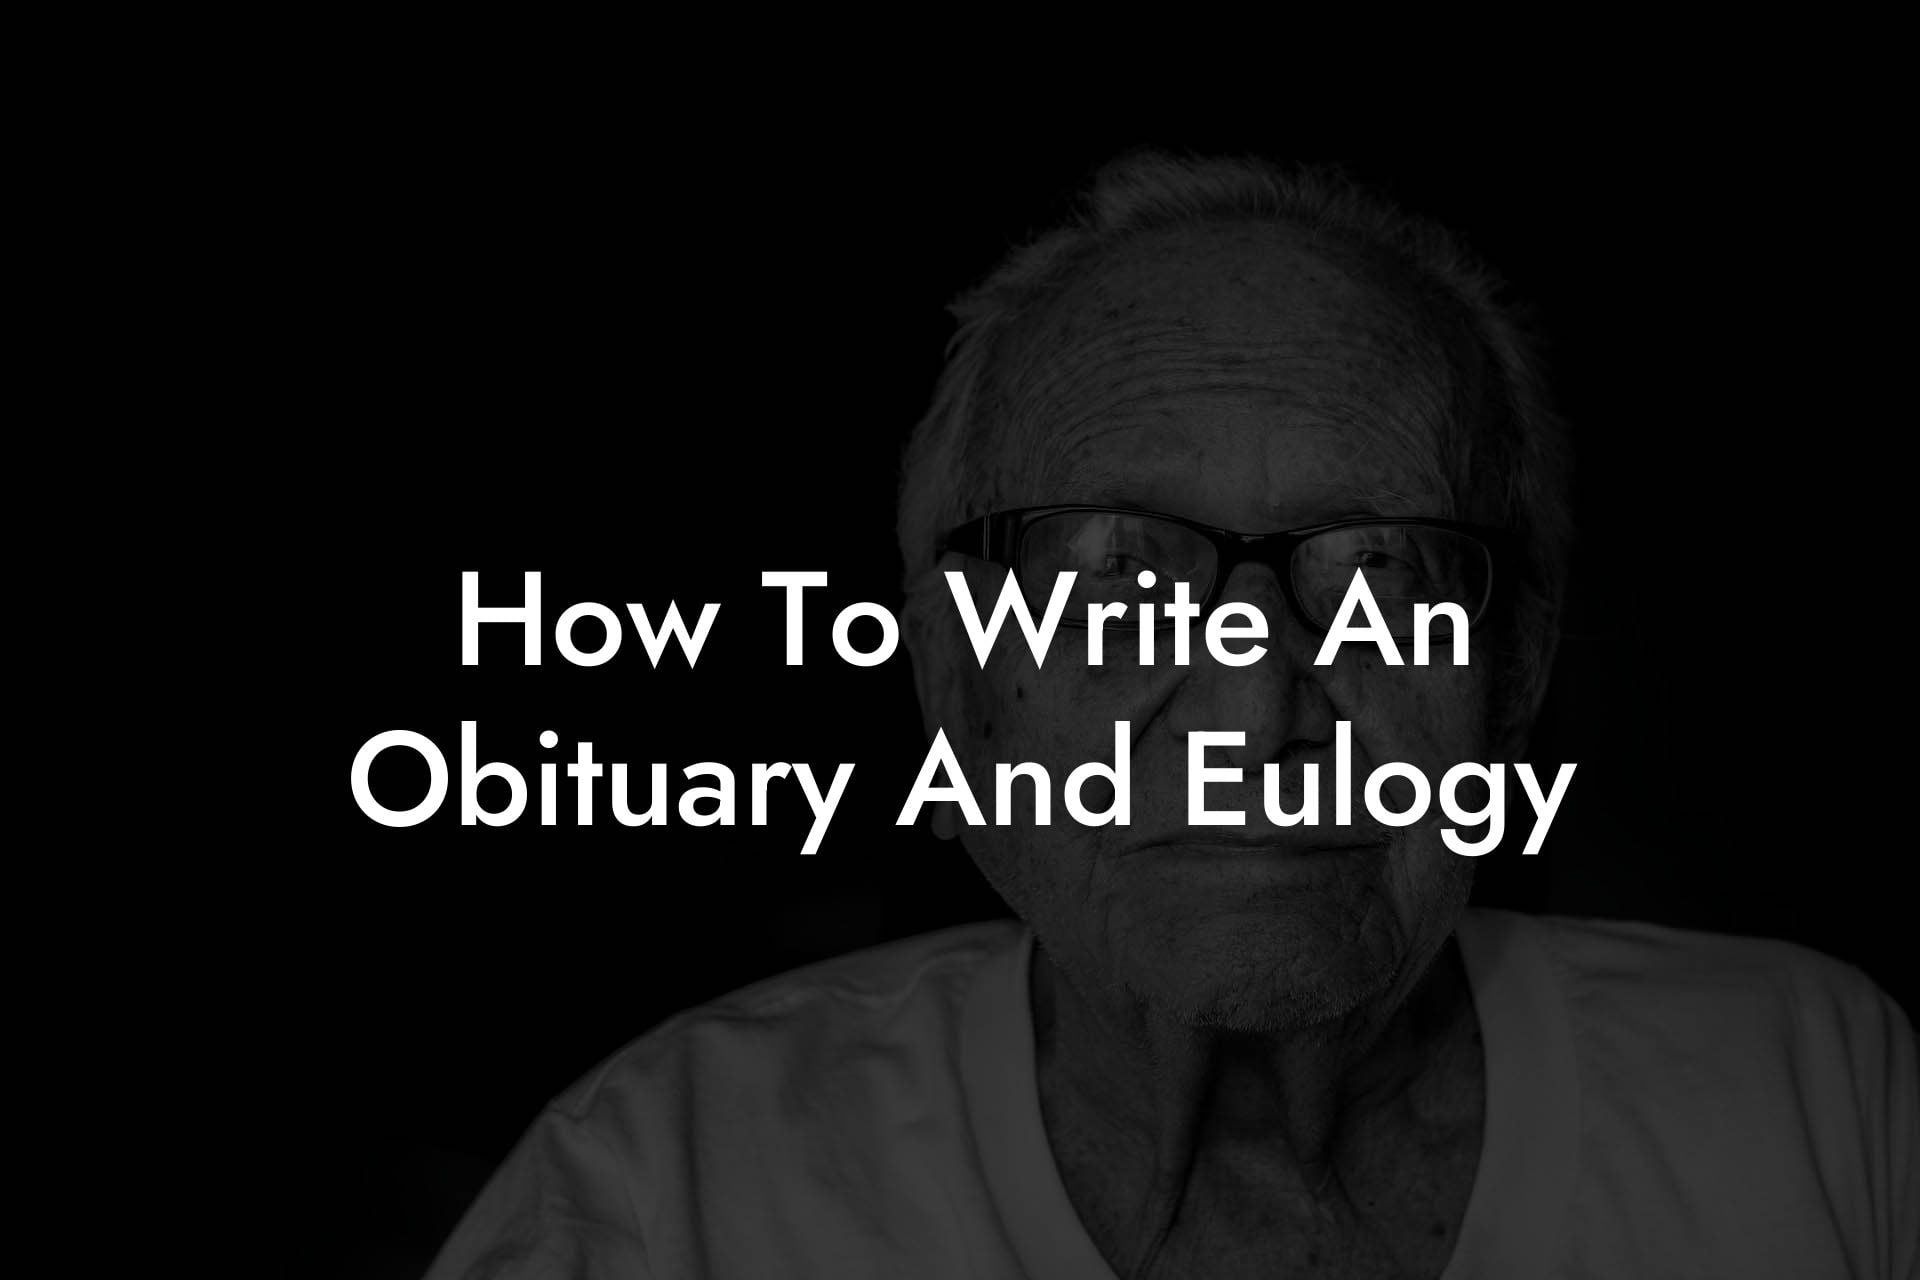 How To Write An Obituary And Eulogy